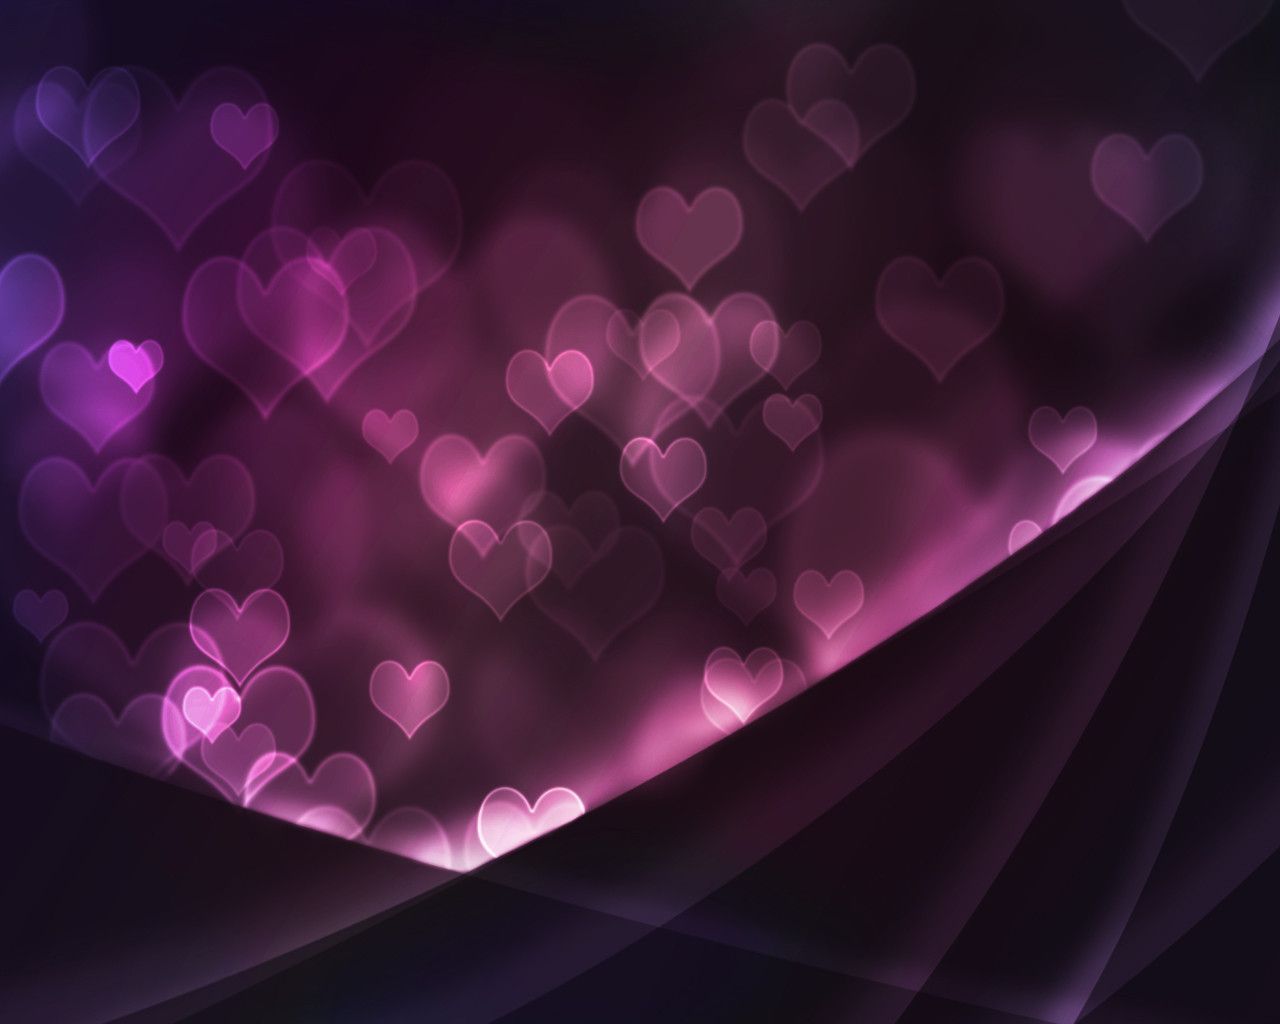 Cool heart background